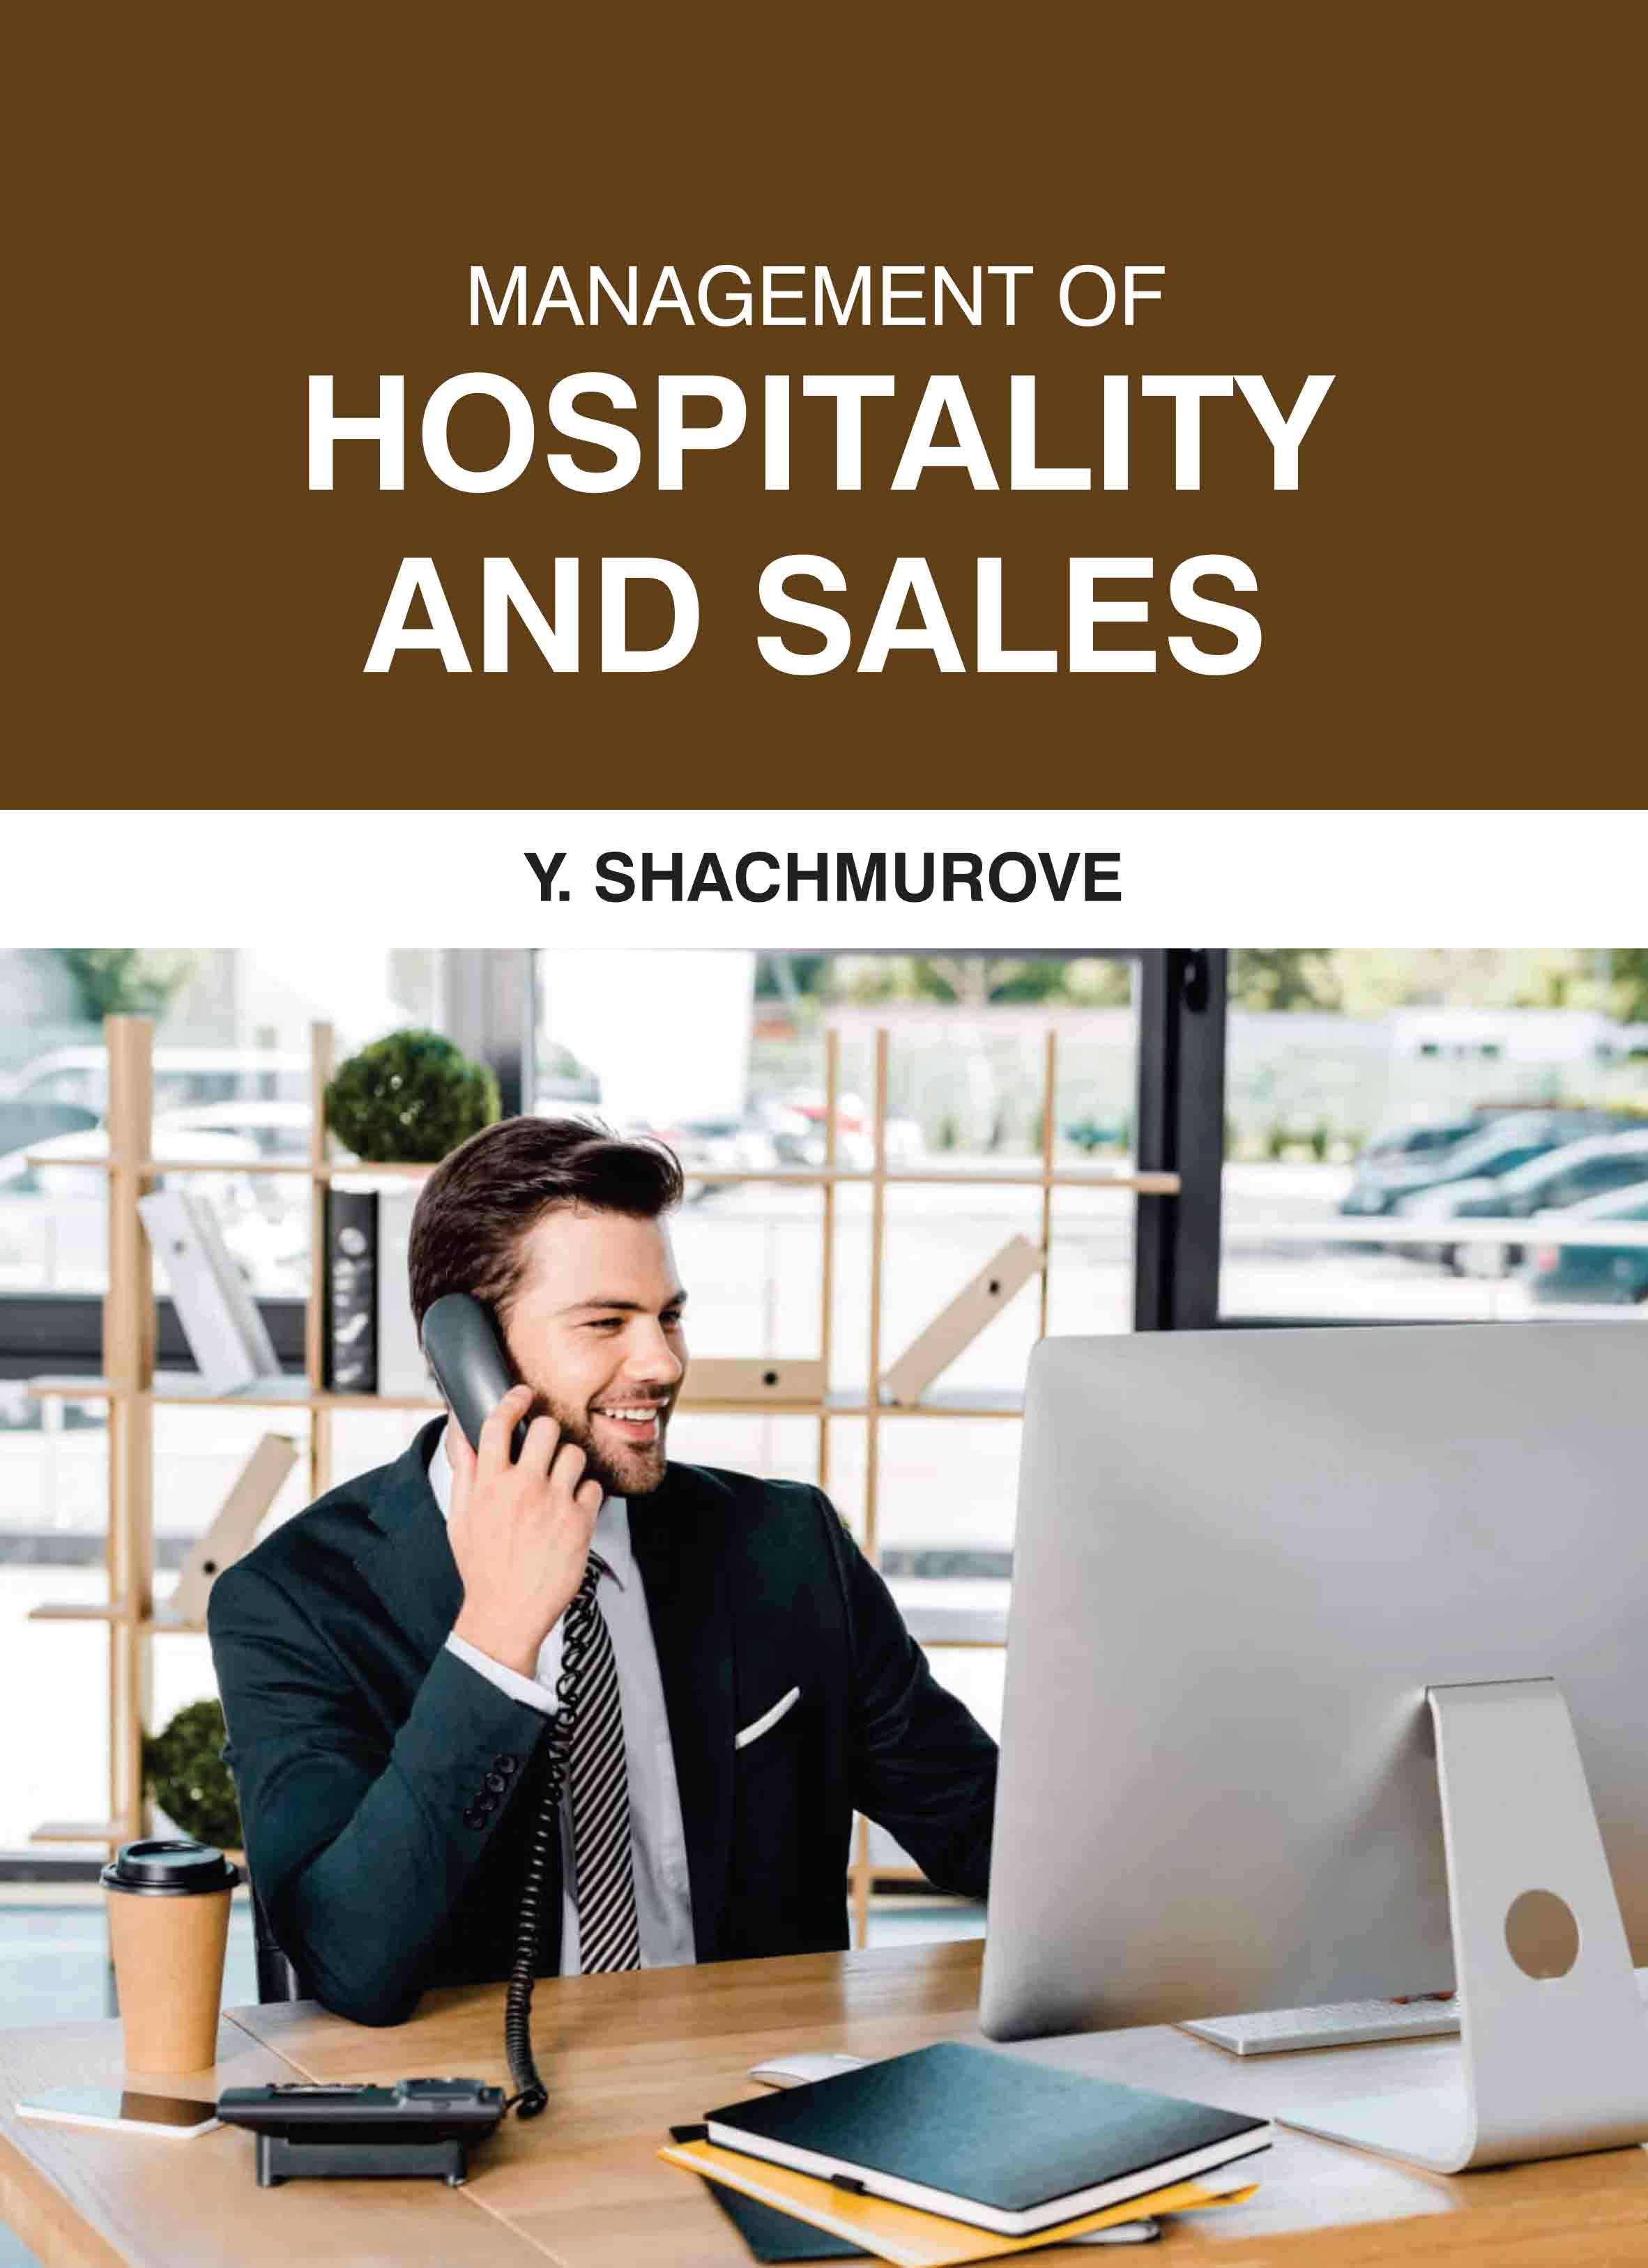 Management of Hospitality and Sales